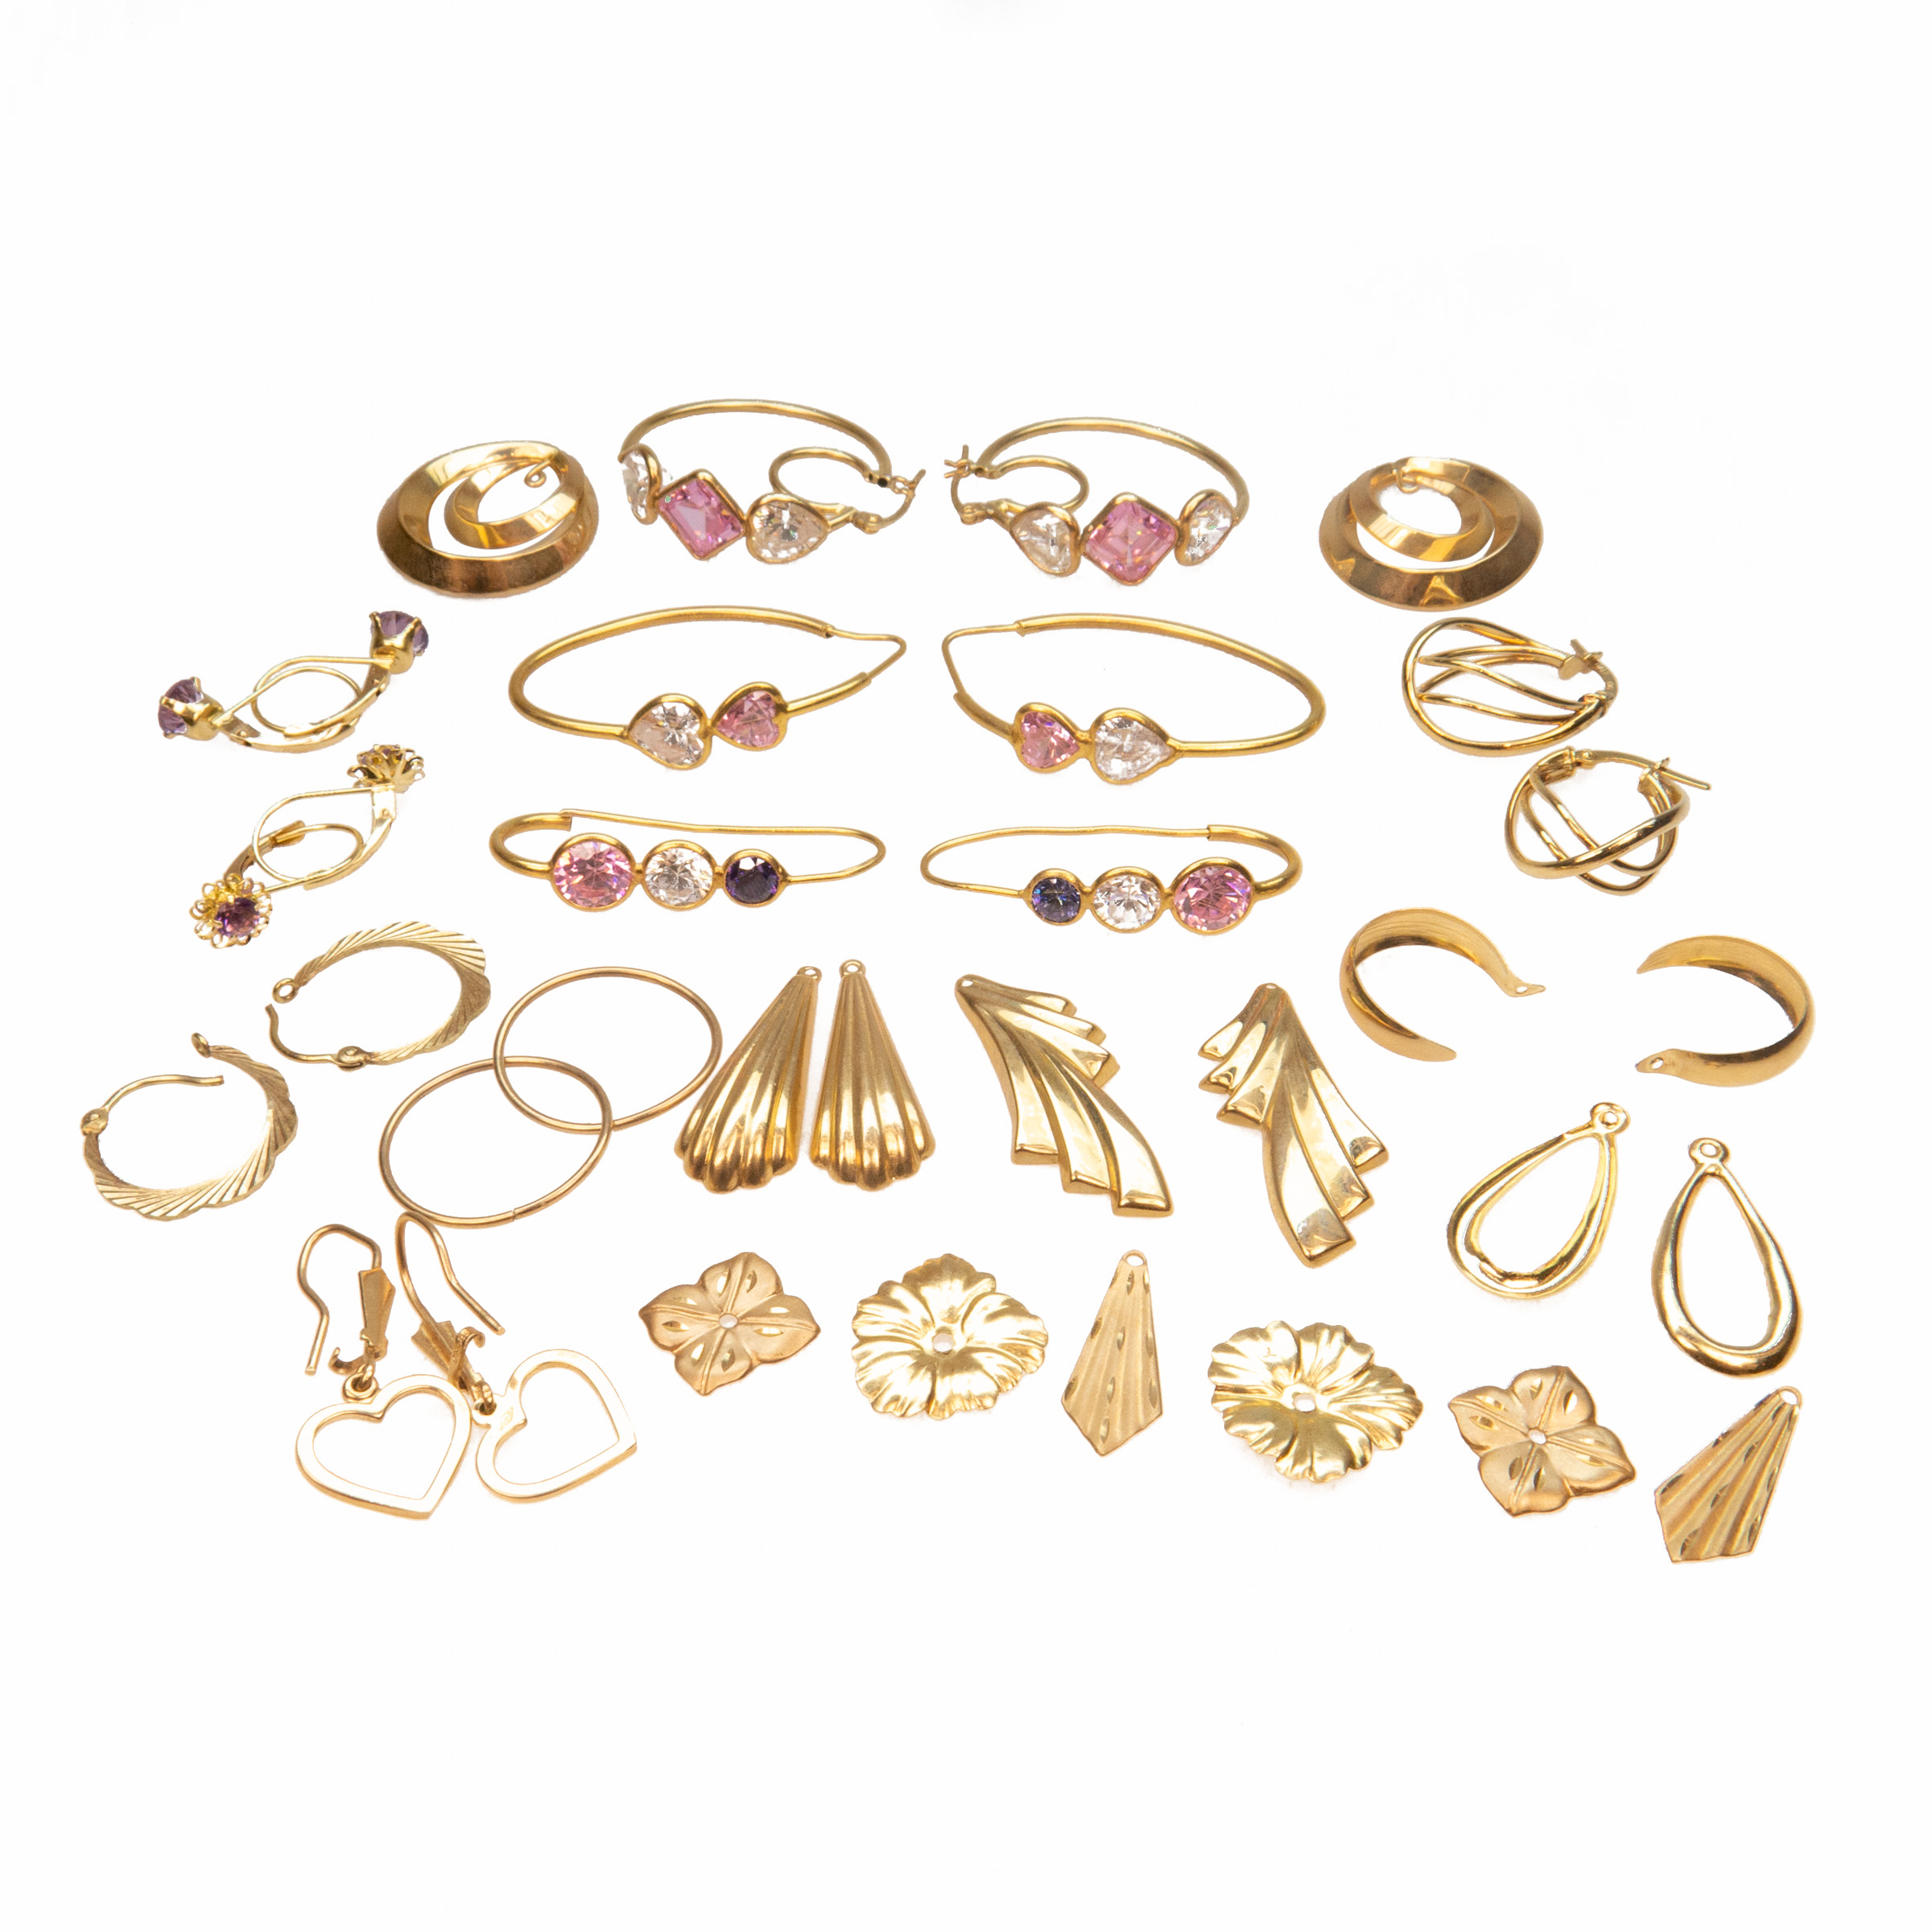 Small Quantity Of 14K Yellow Gold Earrings And Earring Enhancers